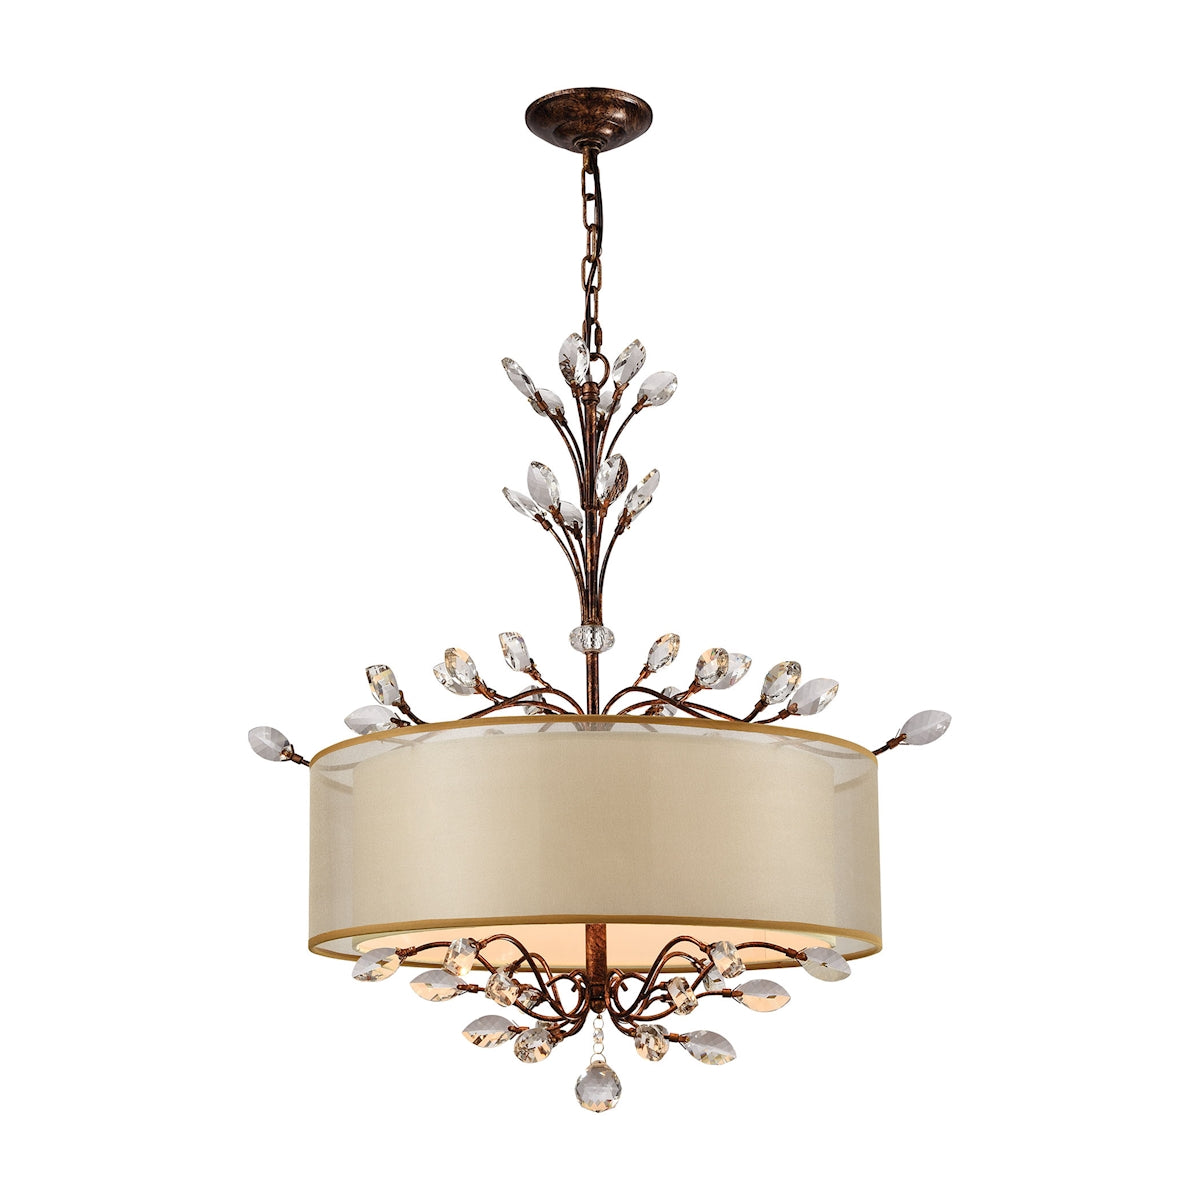 ELK Lighting 16292/4 - Asbury 26" Wide 4-Light Chandelier with Organza and Fabric Shade in Spanish B